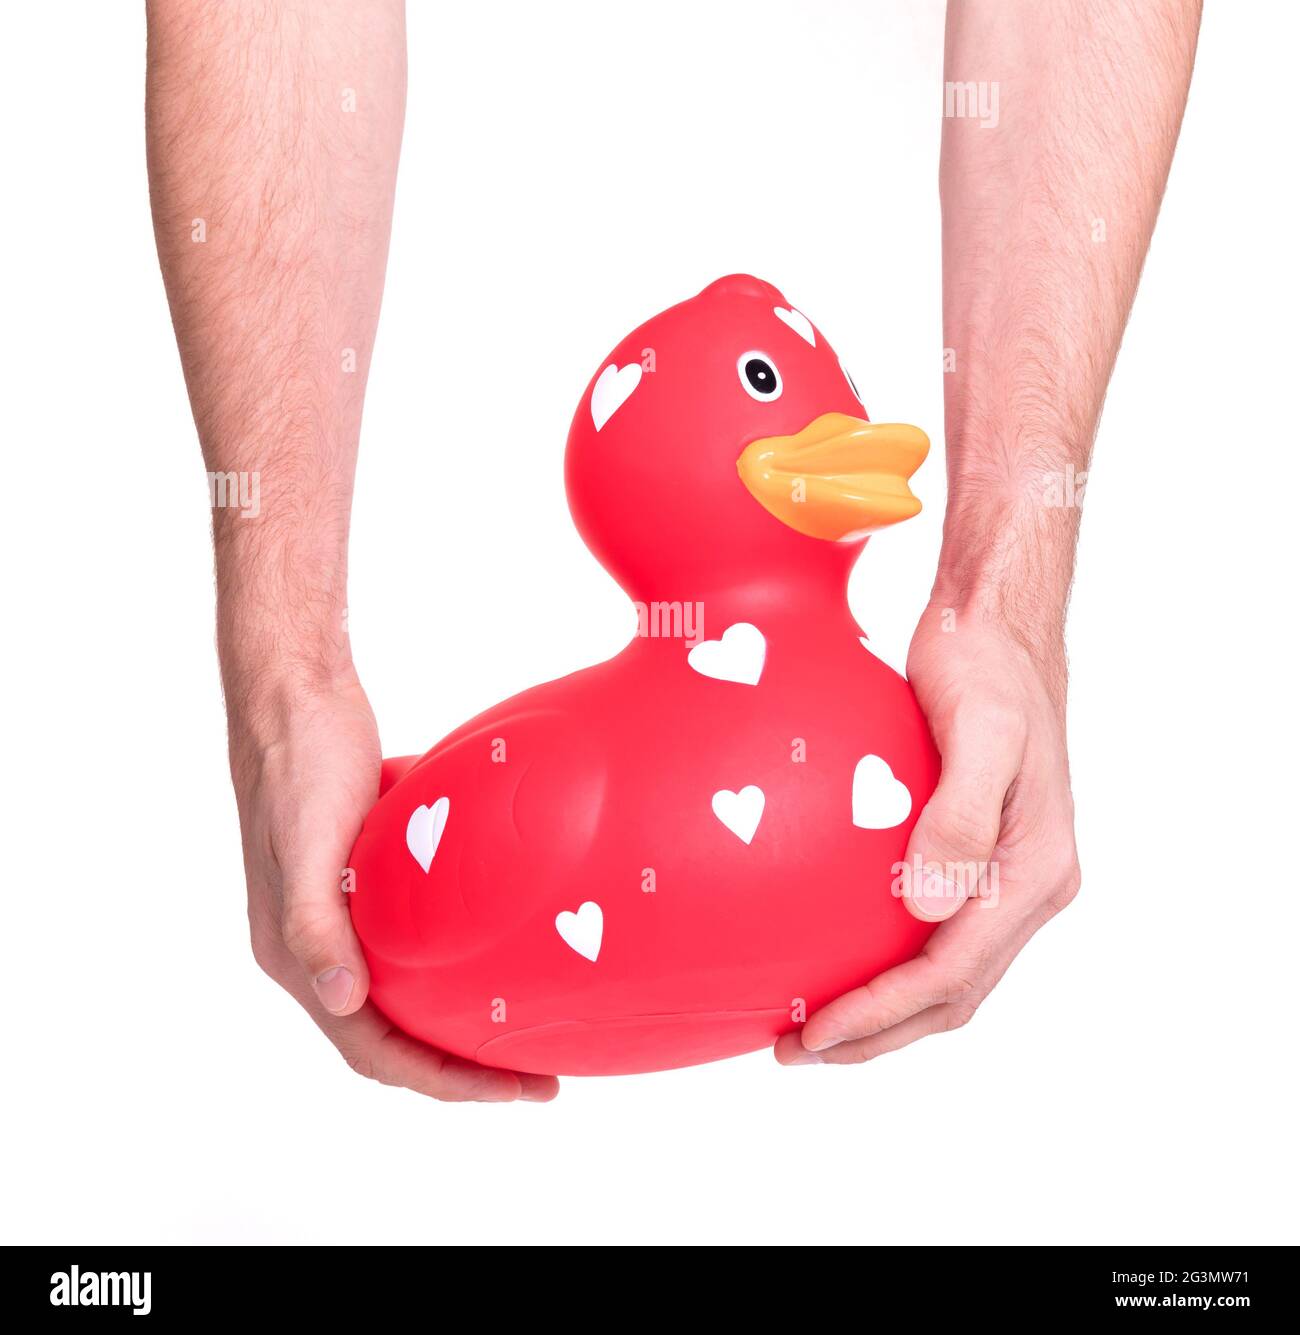 Hands holding large red rubber duck Stock Photo